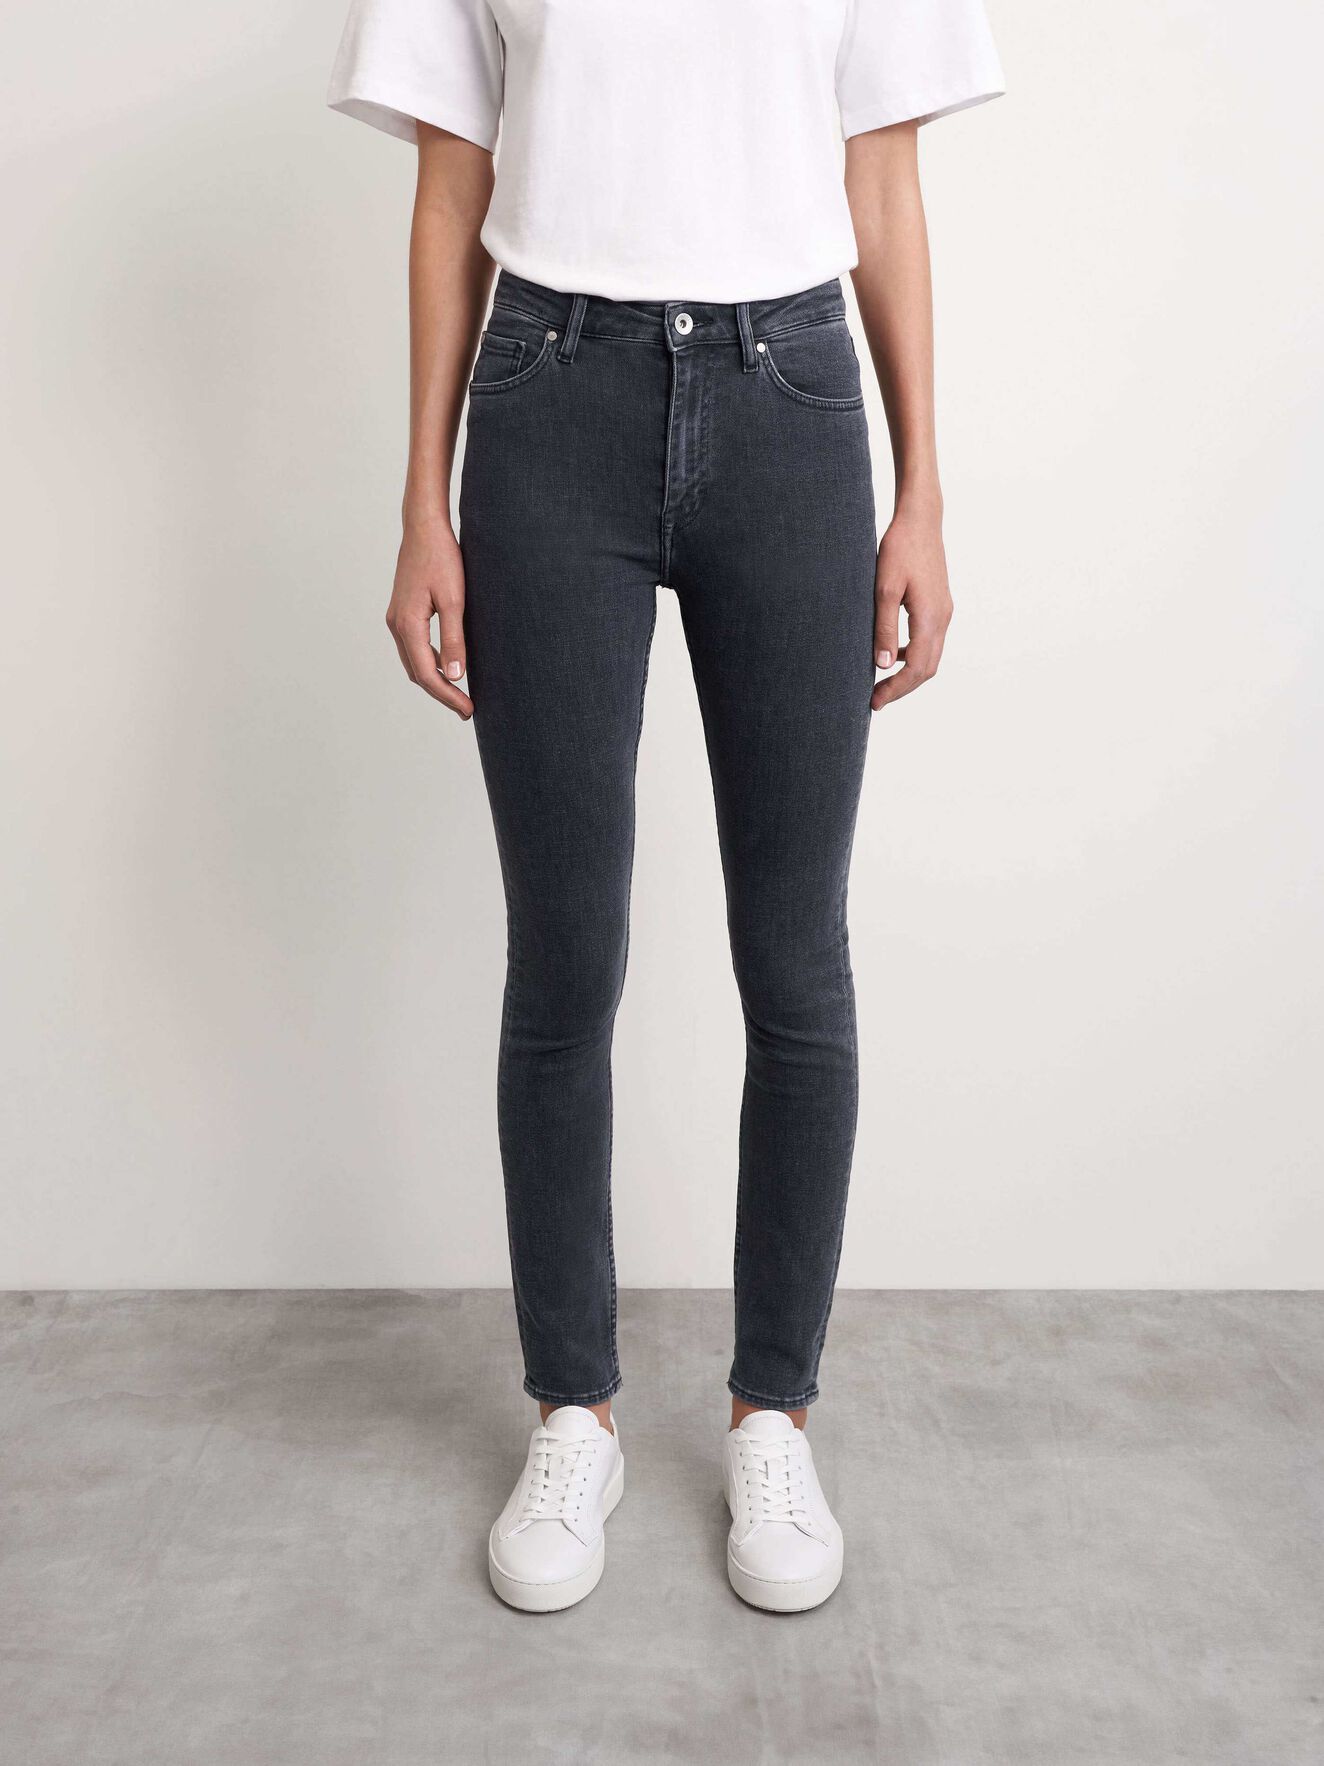 Shelly Jeans - Buy Jeans online